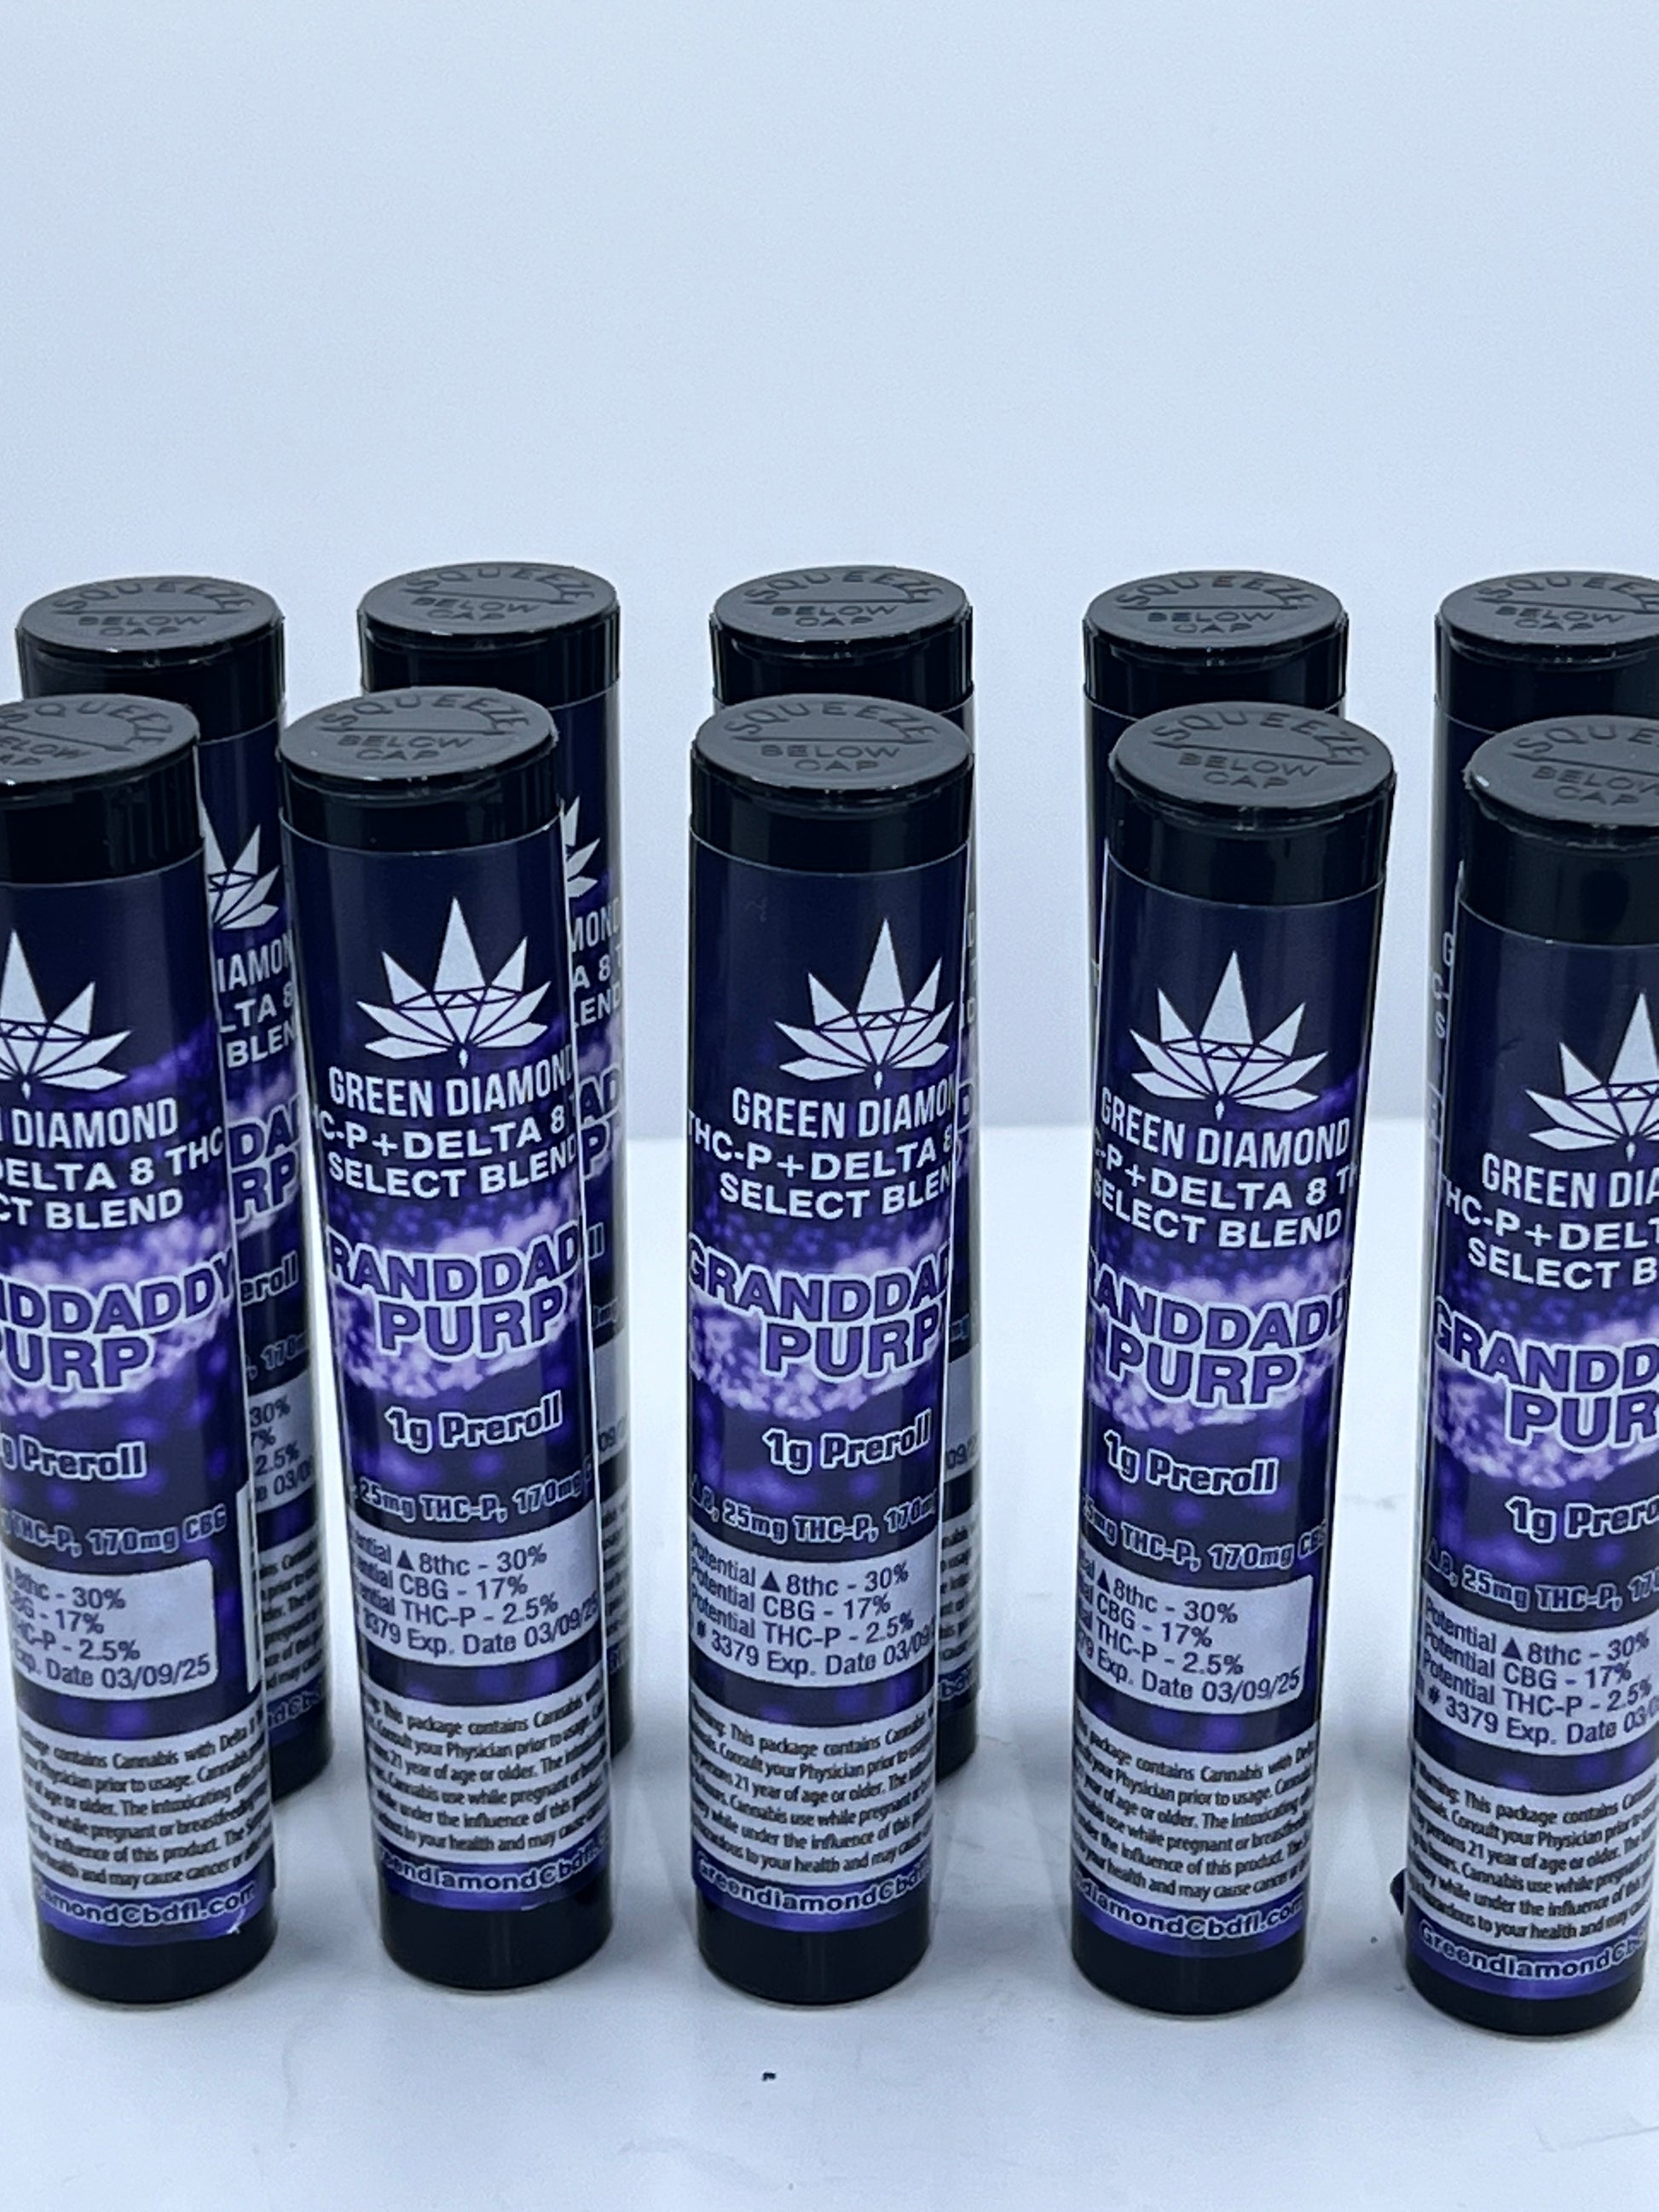 Green Diamond Delta 8 THC + THC-P Granddaddy Purp Pre-Roll yoga smokes yoga studio, delivery, delivery near me, yoga smokes smoke shop, find smoke shop, head shop near me, yoga studio, headshop, head shop, local smoke shop, psl, psl smoke shop, smoke shop, smokeshop, yoga, yoga studio, dispensary, local dispensary, smokeshop near me, port saint lucie, florida, port st lucie, lounge, life, highlife, love, stoned, highsociety. Yoga Smokes 10-Pack